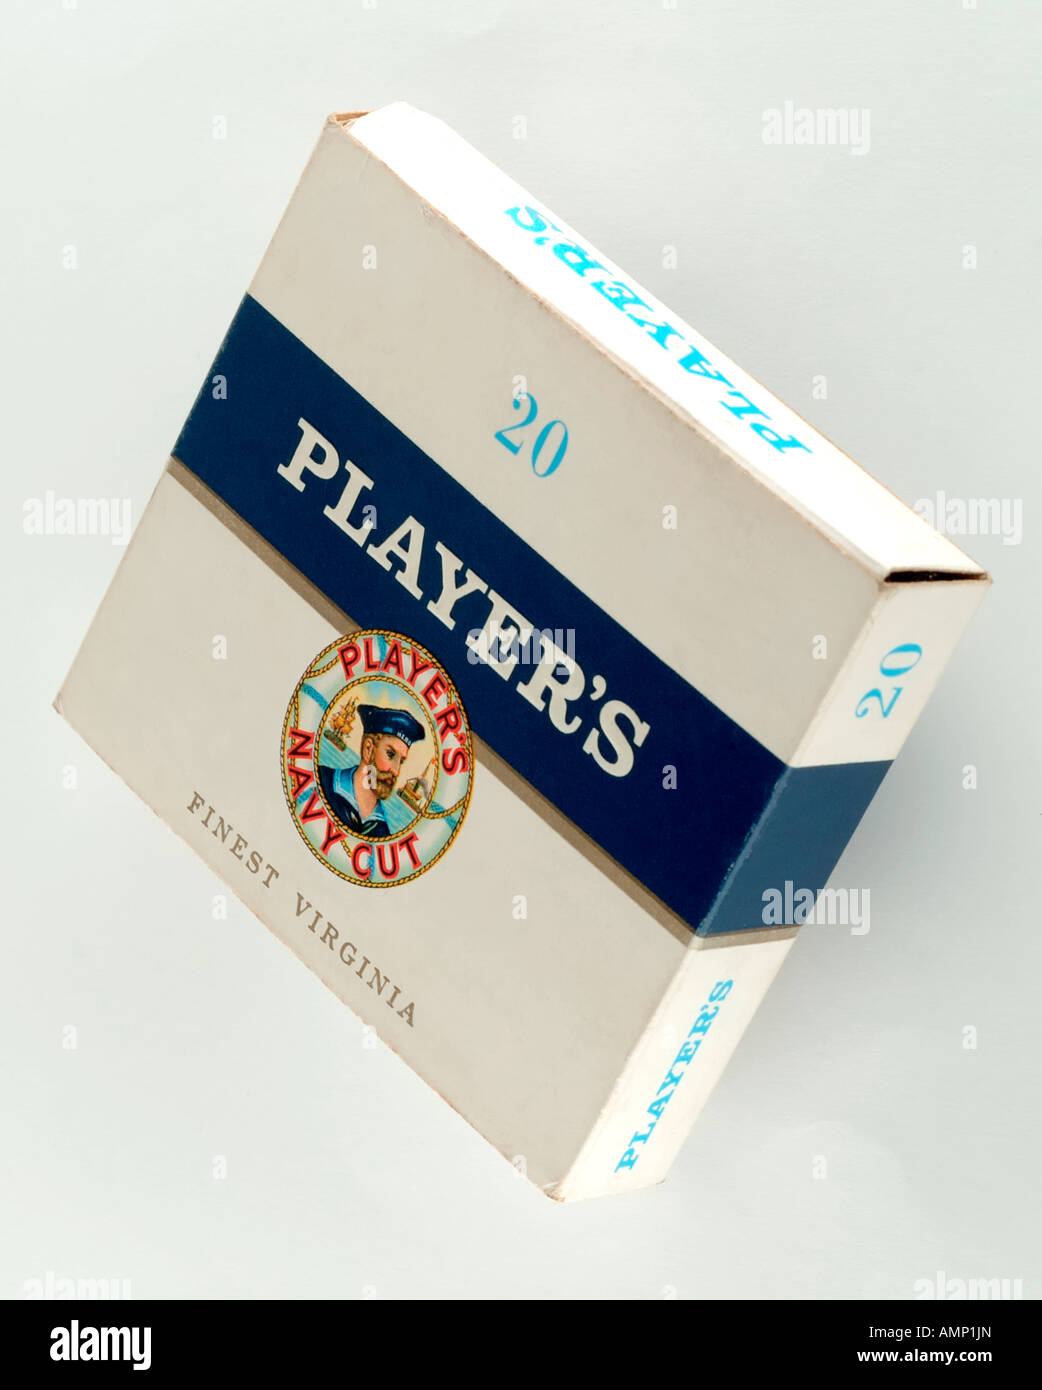 File:Package of John Player & Sons Navy Cut Tabacco, cigarettes.JPG -  Wikimedia Commons